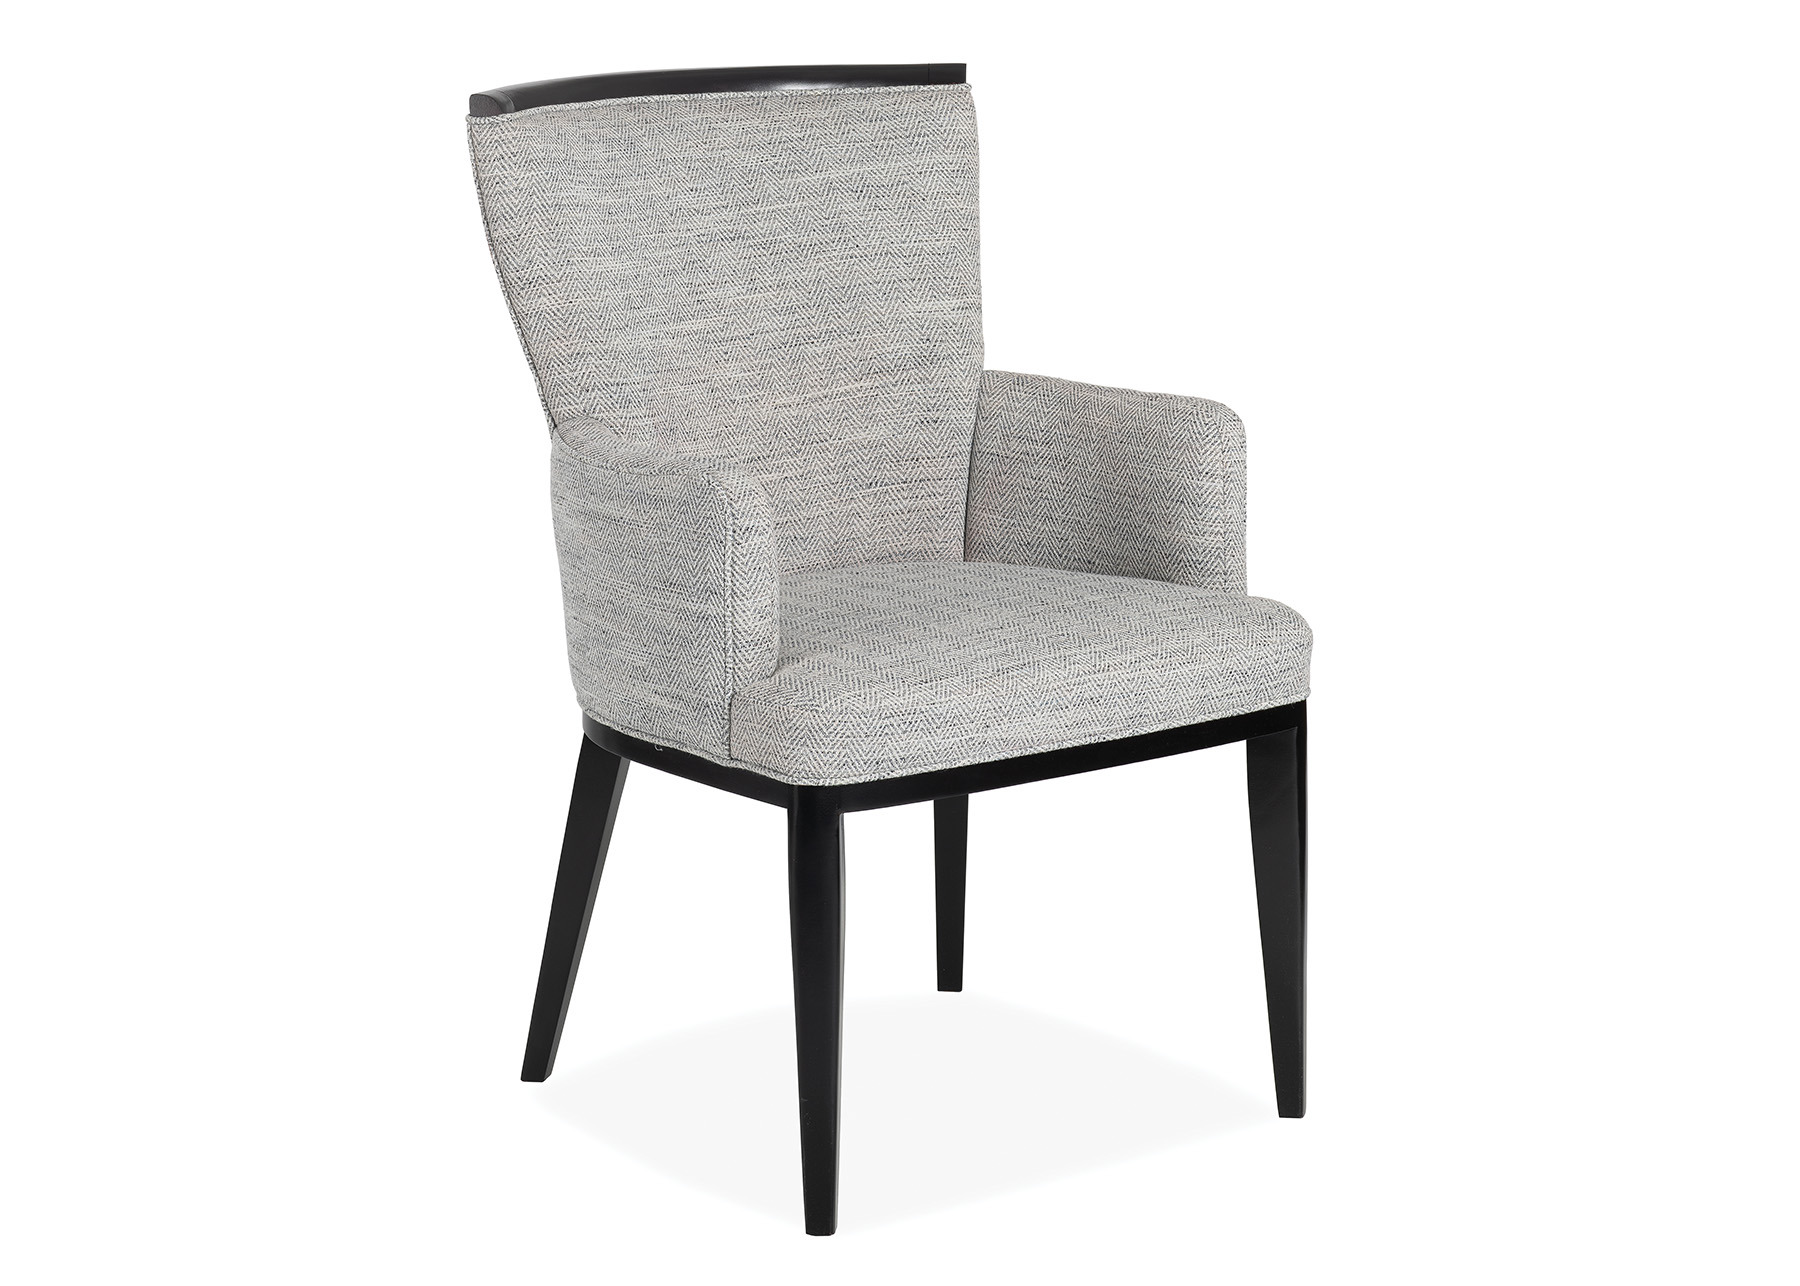 Jessica Charles 1145-A Brinley Armed Dining Chair